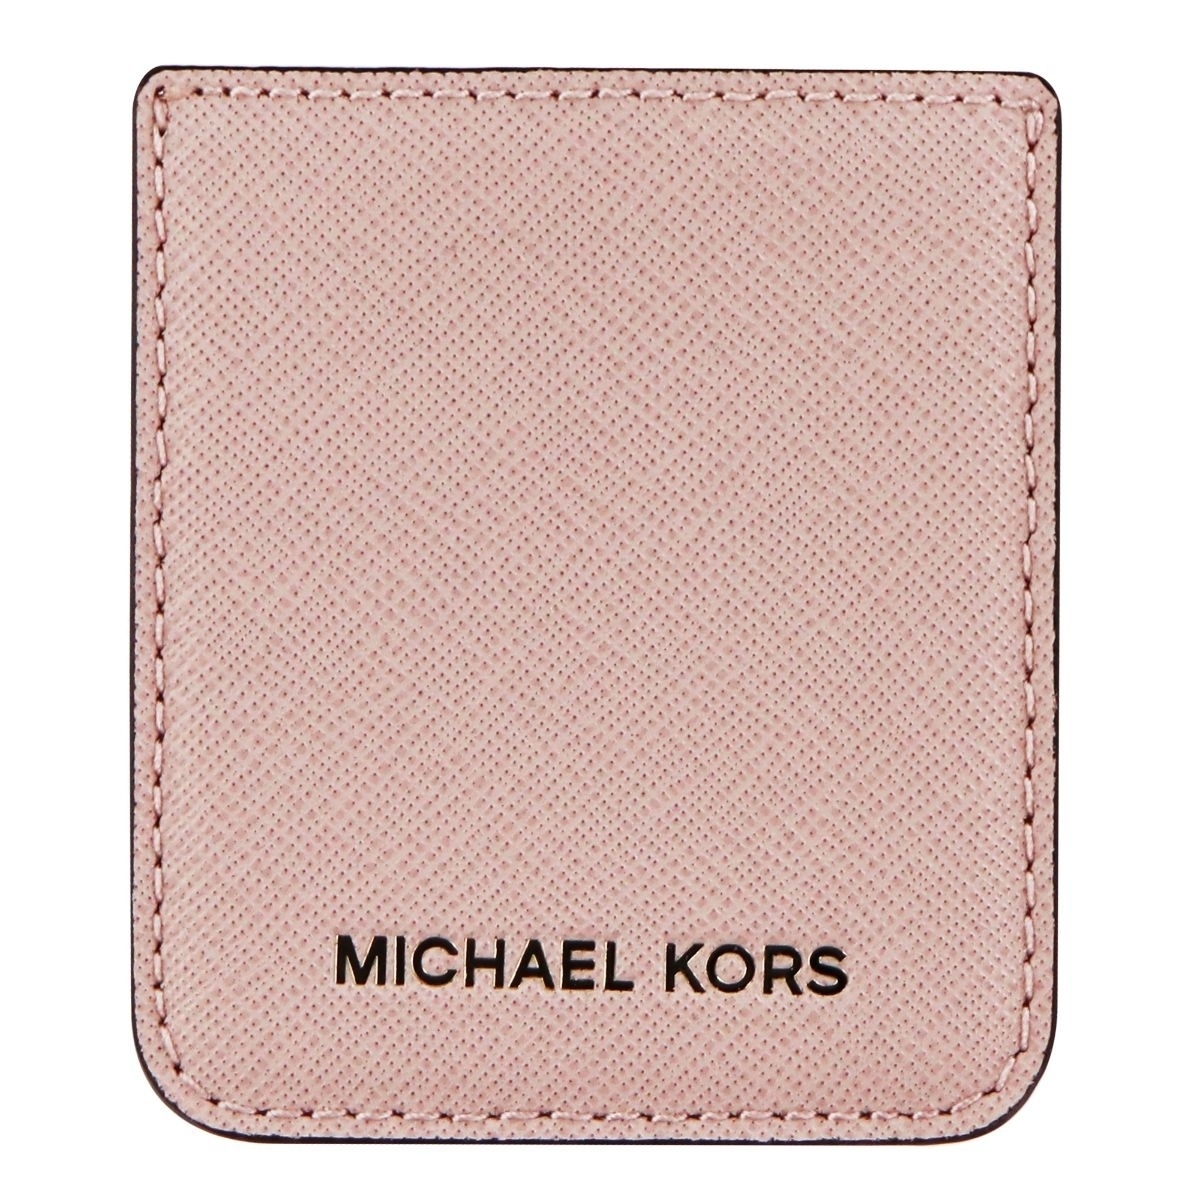 Michael Kors Phone Pocket Sticker With Adhesive Backing - Soft Pink